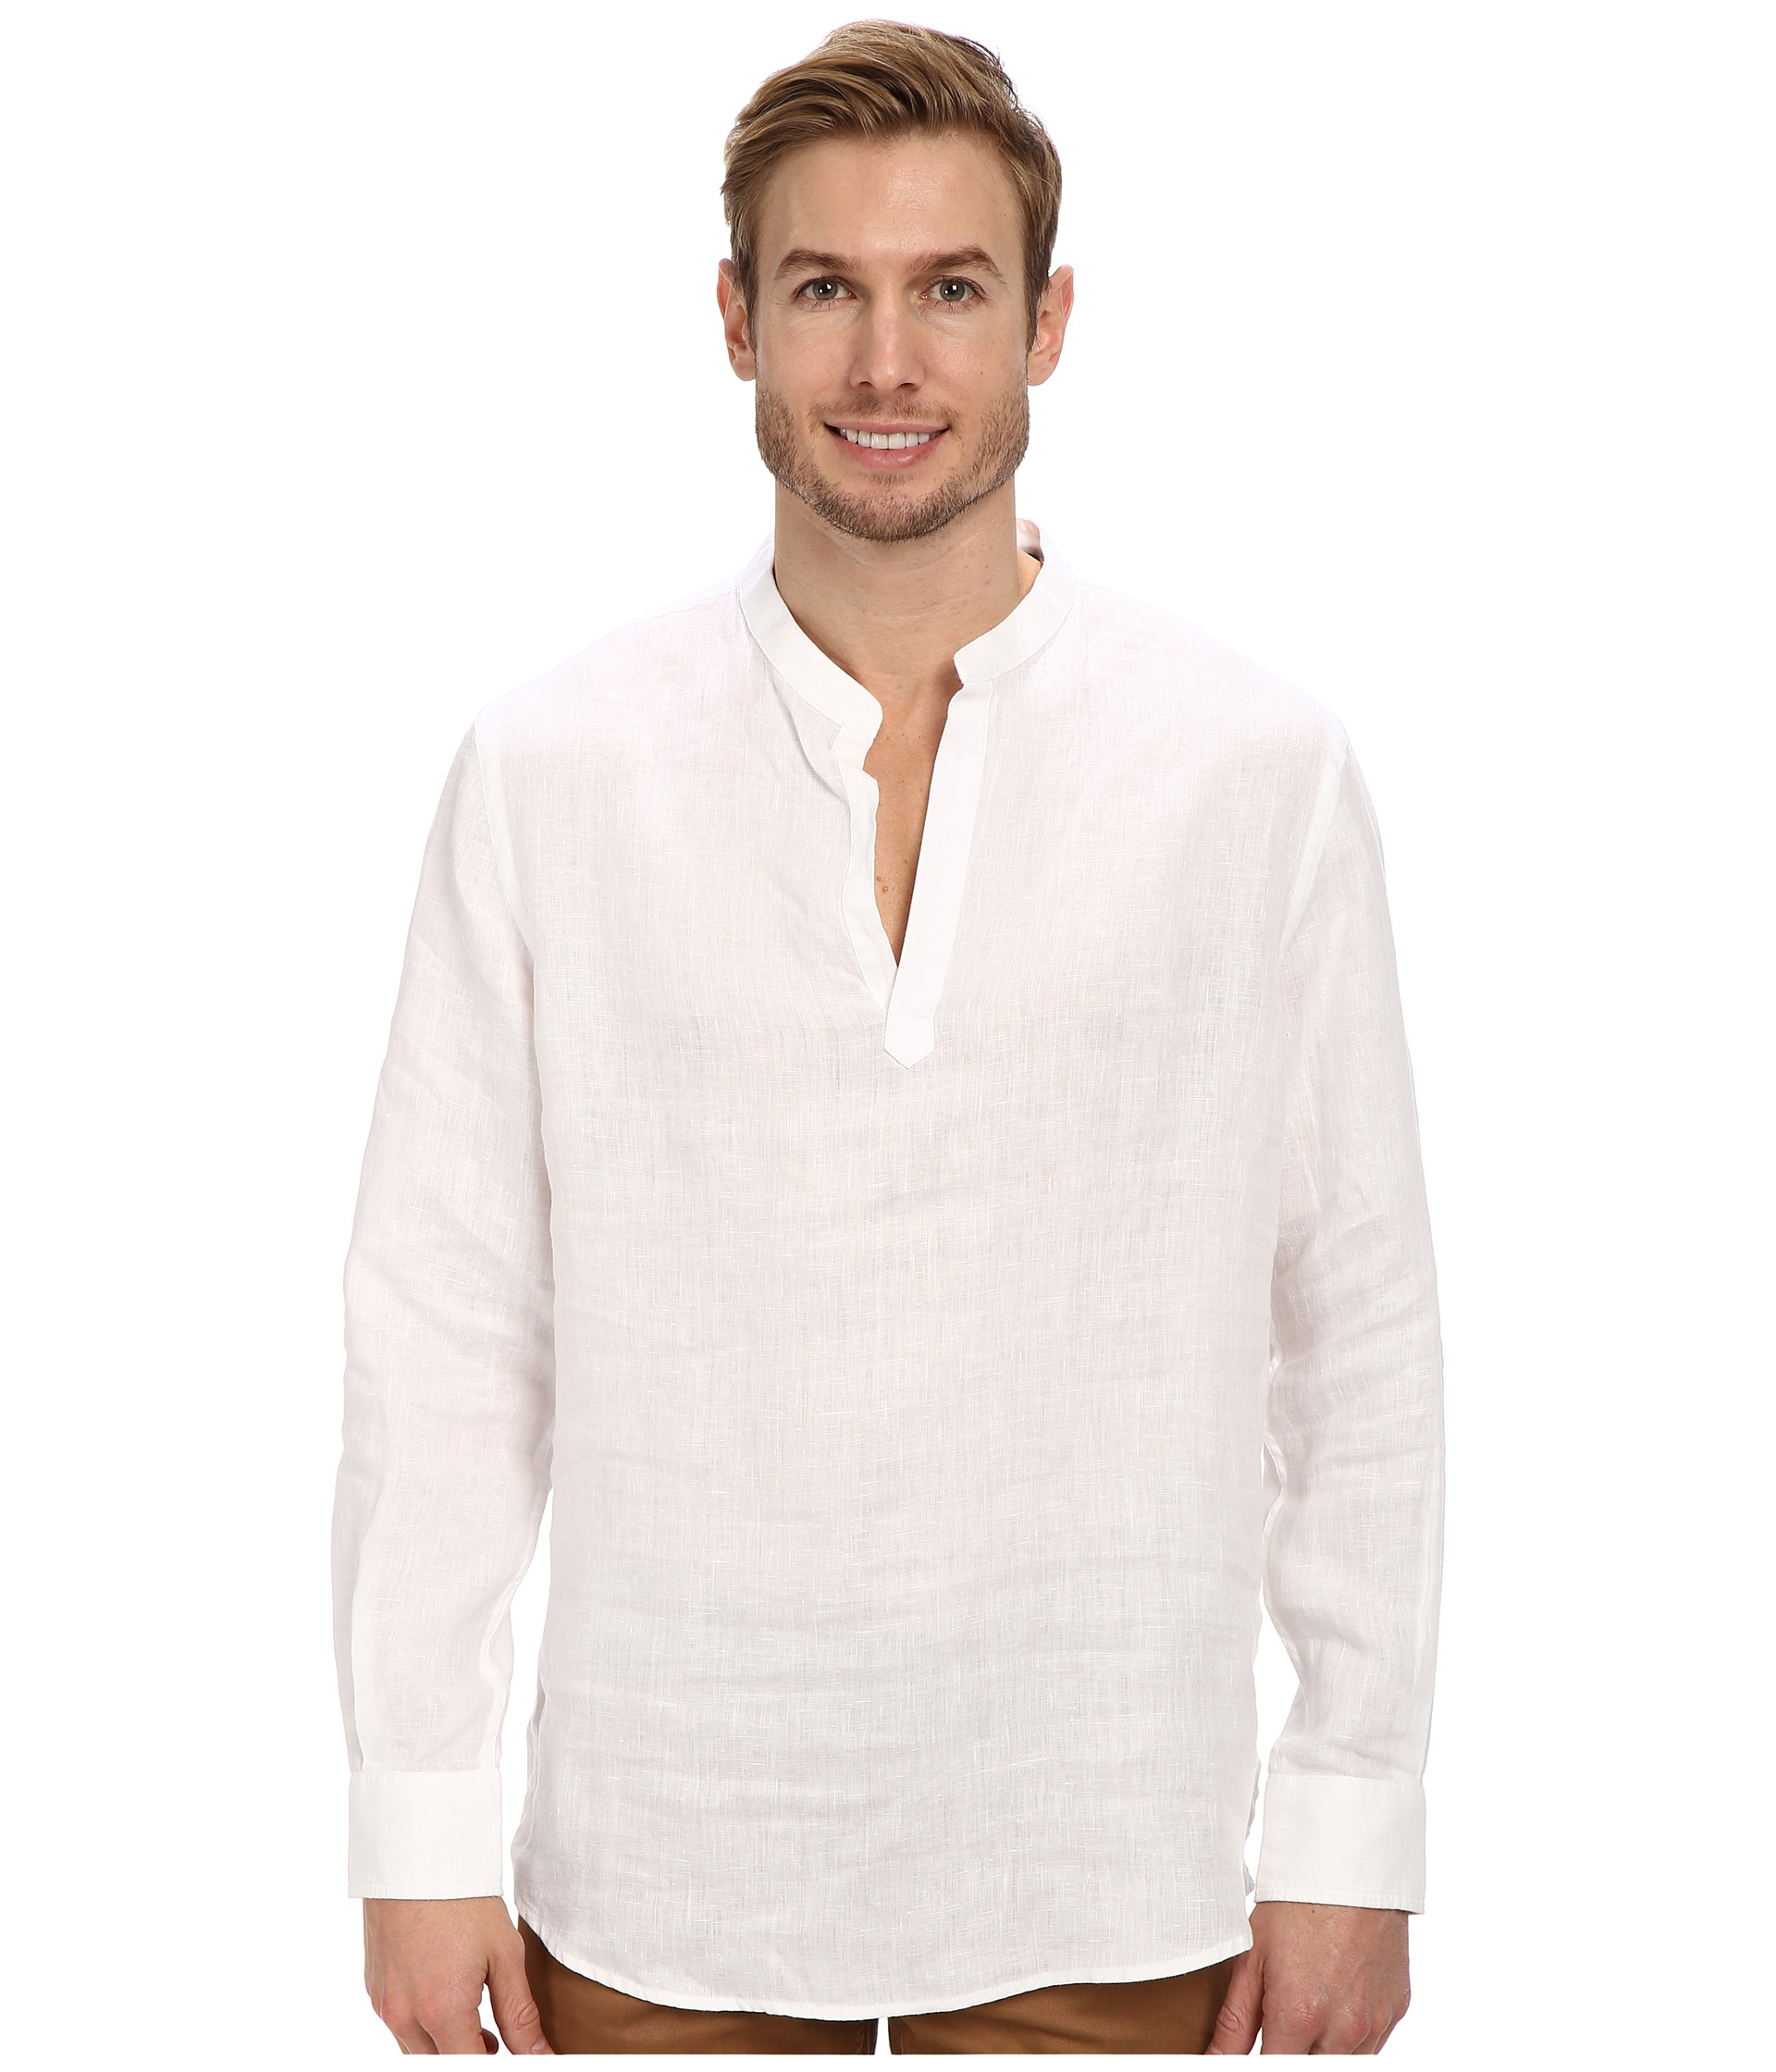 Lyst - Perry Ellis Long Sleeve Solid Linen Popover Shirt in White for Men